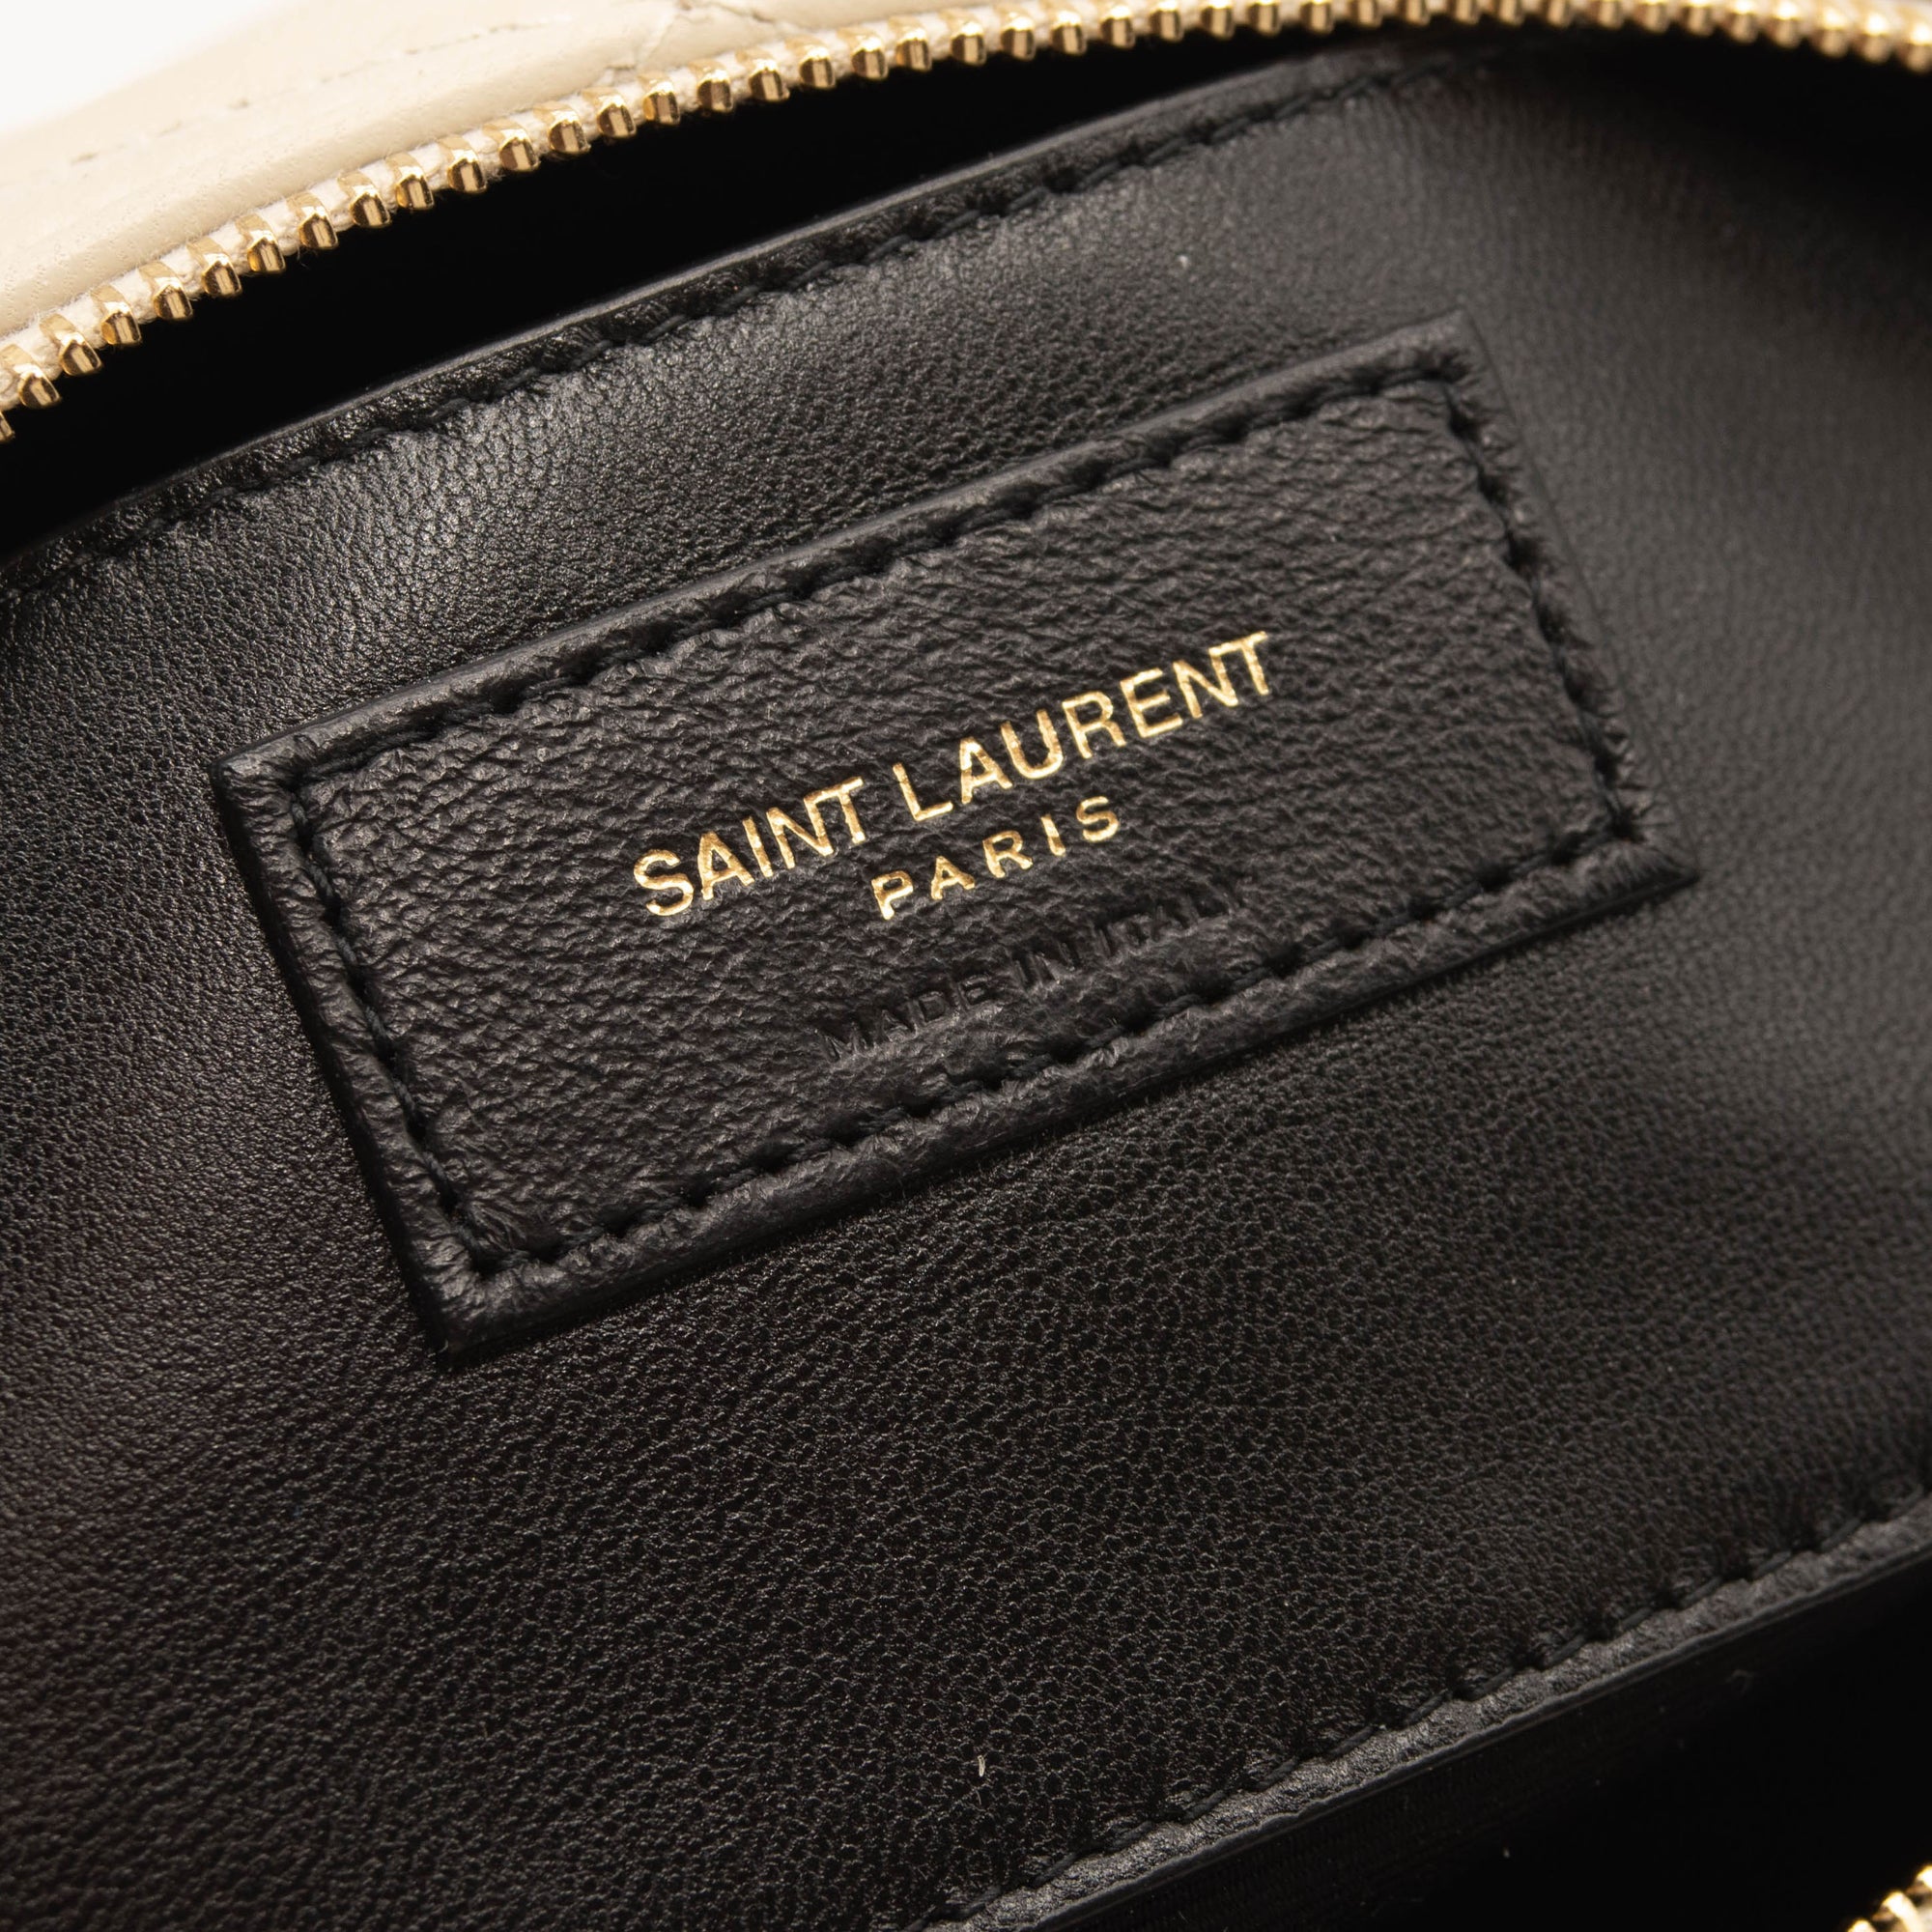 Saint Laurent Small Sade Tube Bag in Quilted Lambskin White - MyDesignerly